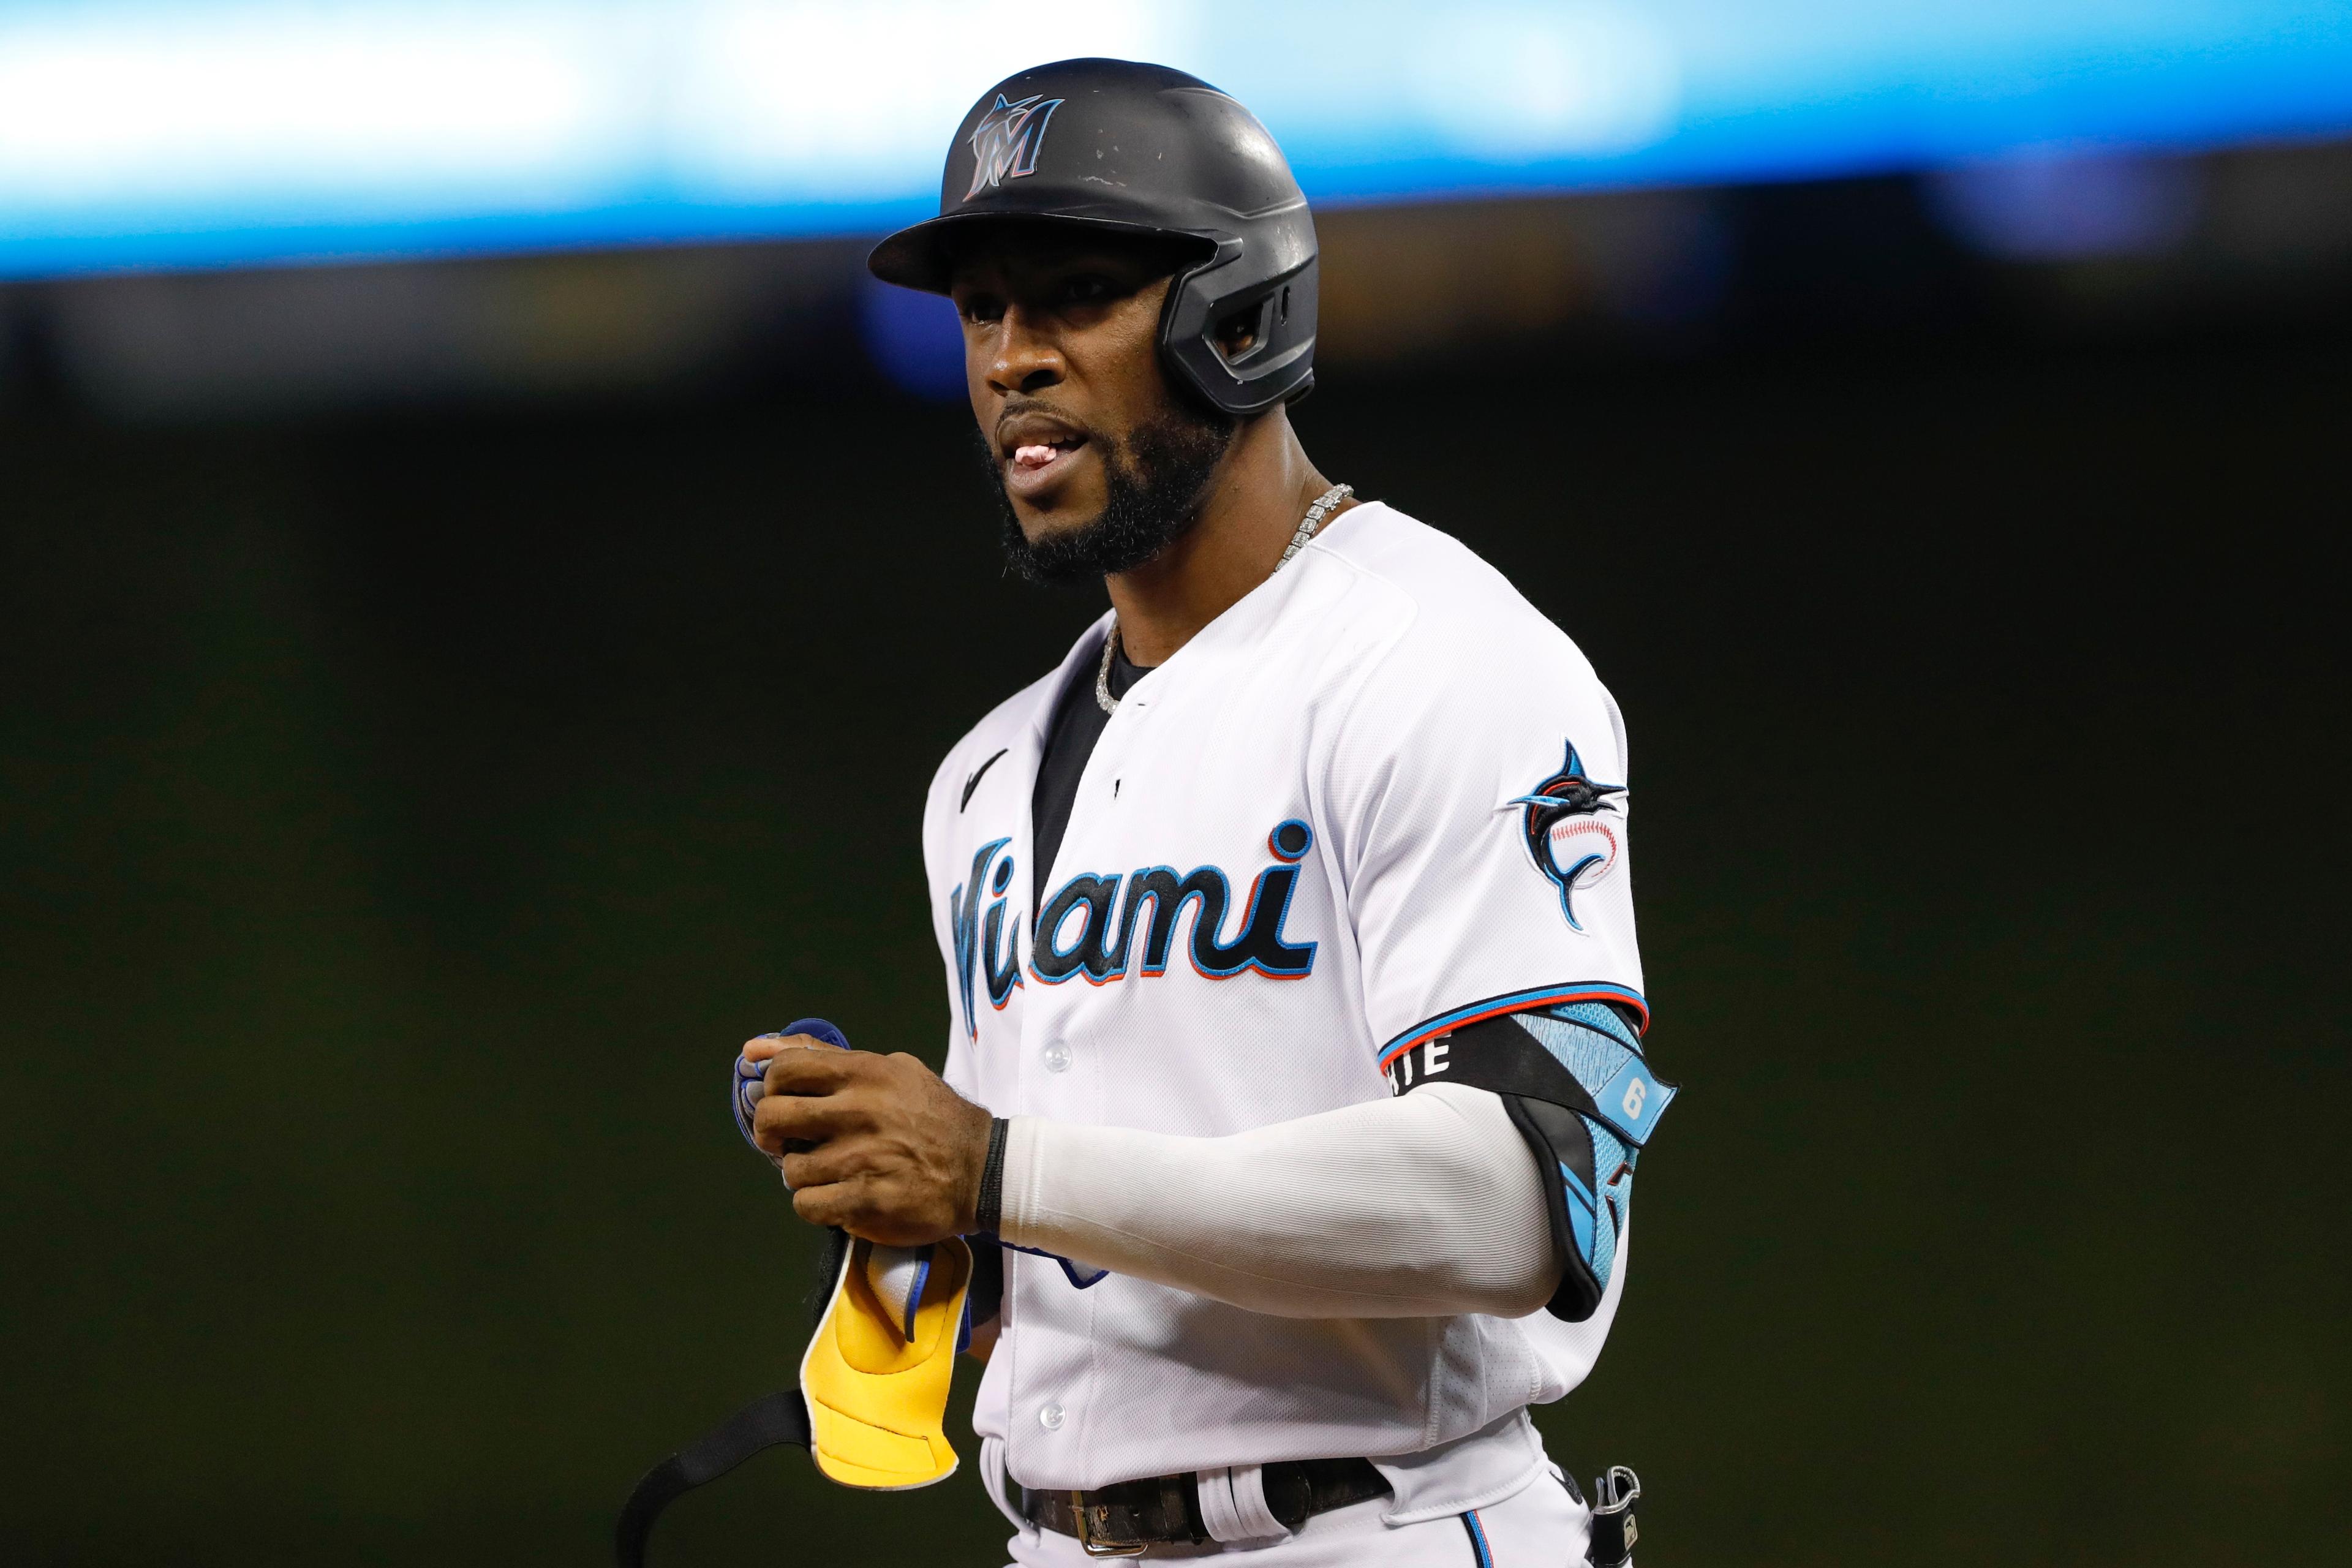 Miami Marlins center fielder Starling Marte (6) reacts after reaching first base against the Toronto Blue Jays during the first inning at loanDepot Park. / Sam Navarro-USA TODAY Sports